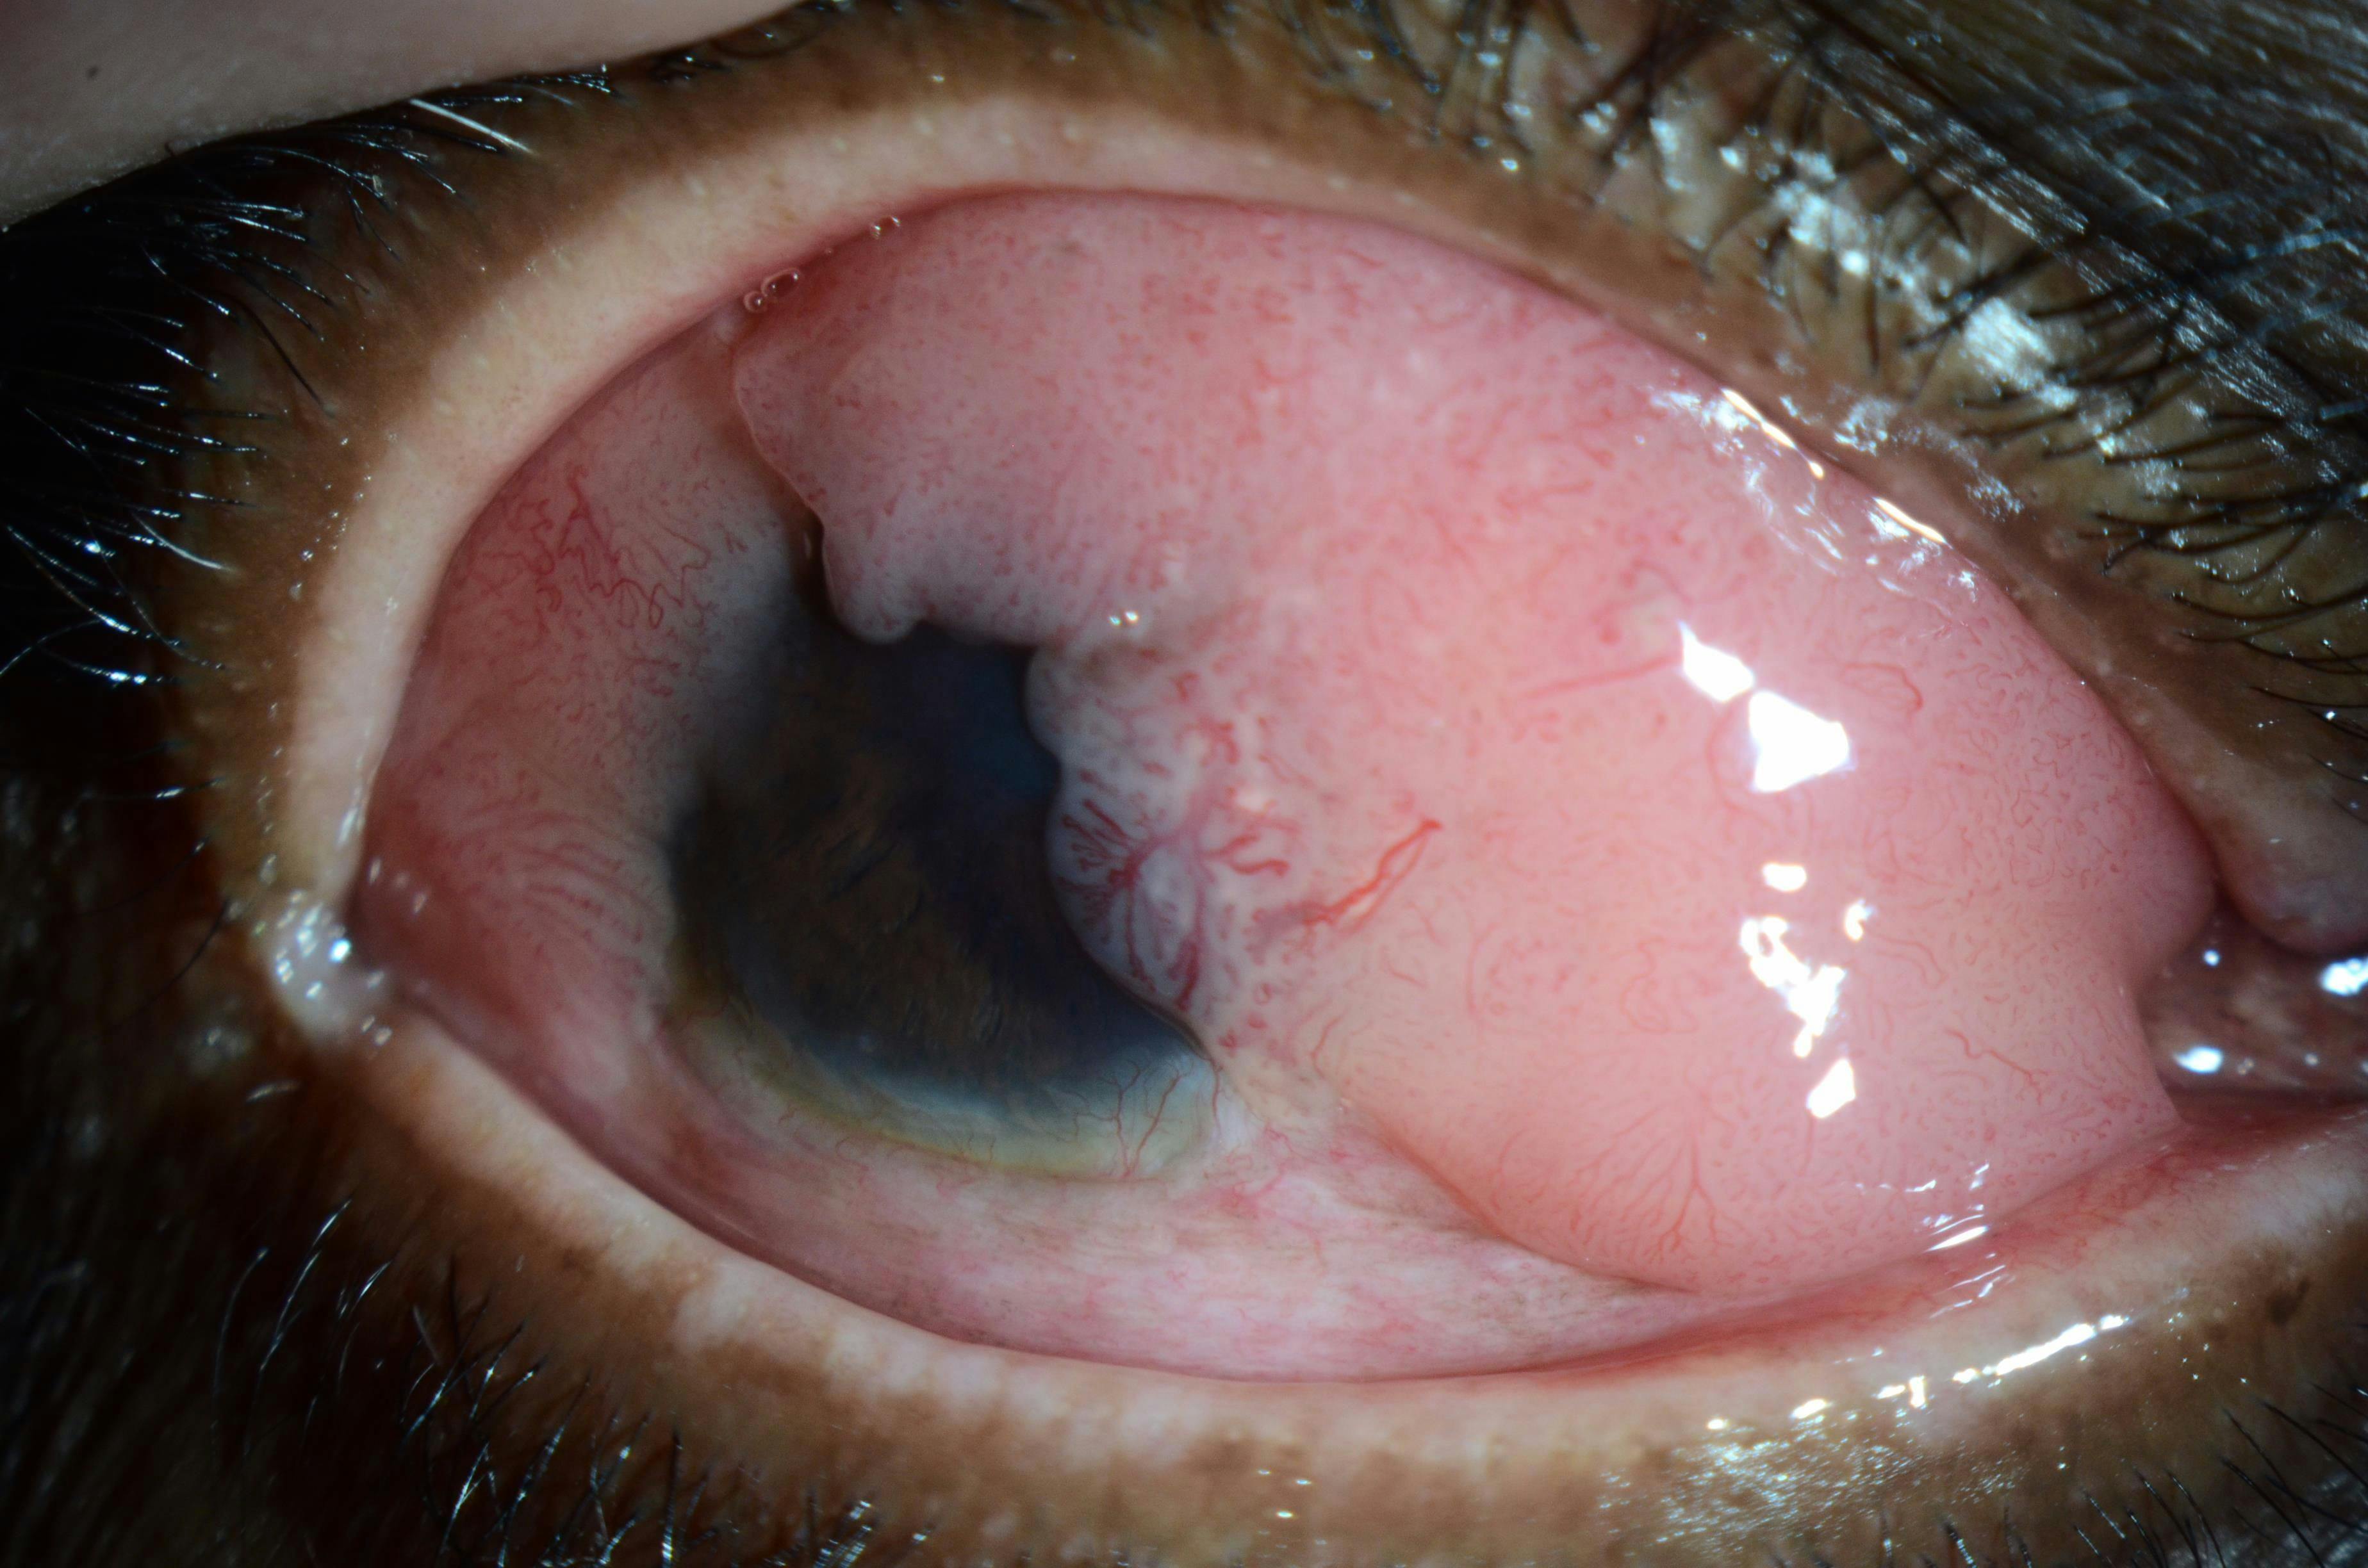 Ocular surface tumors: Rare but deadly